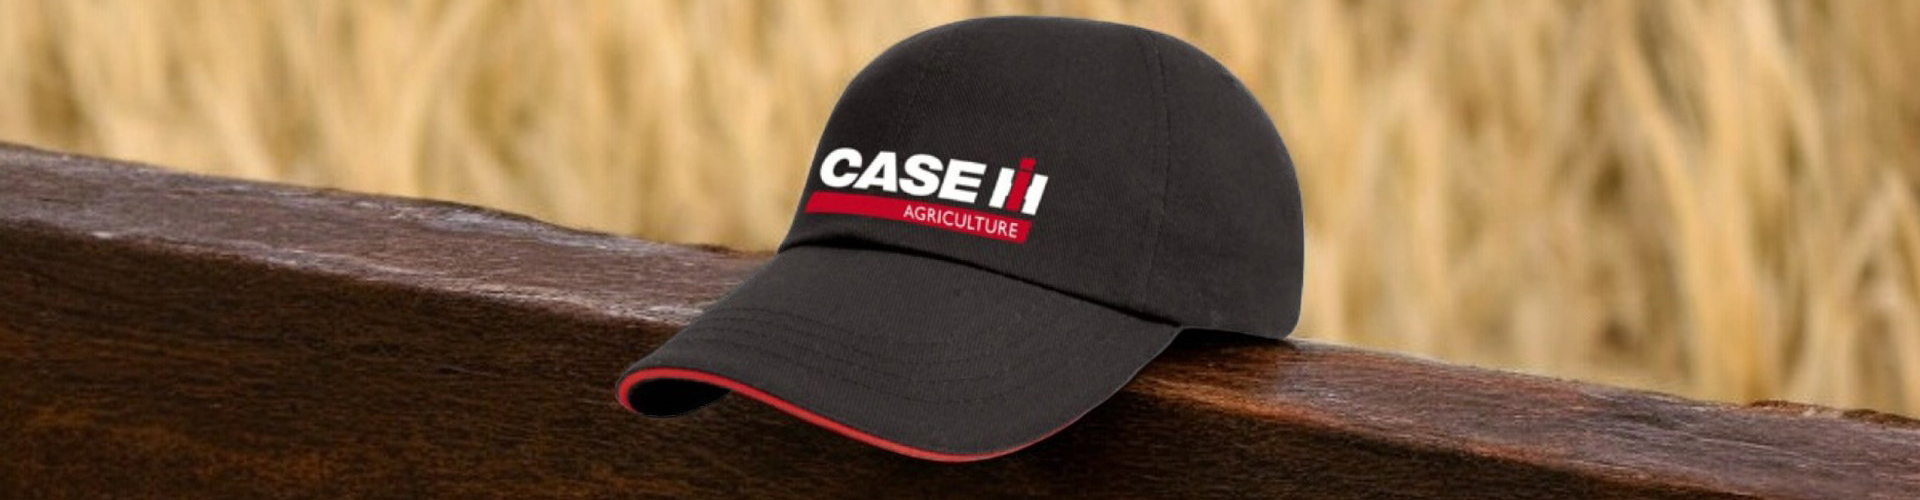 Case IH Caps And Beanies